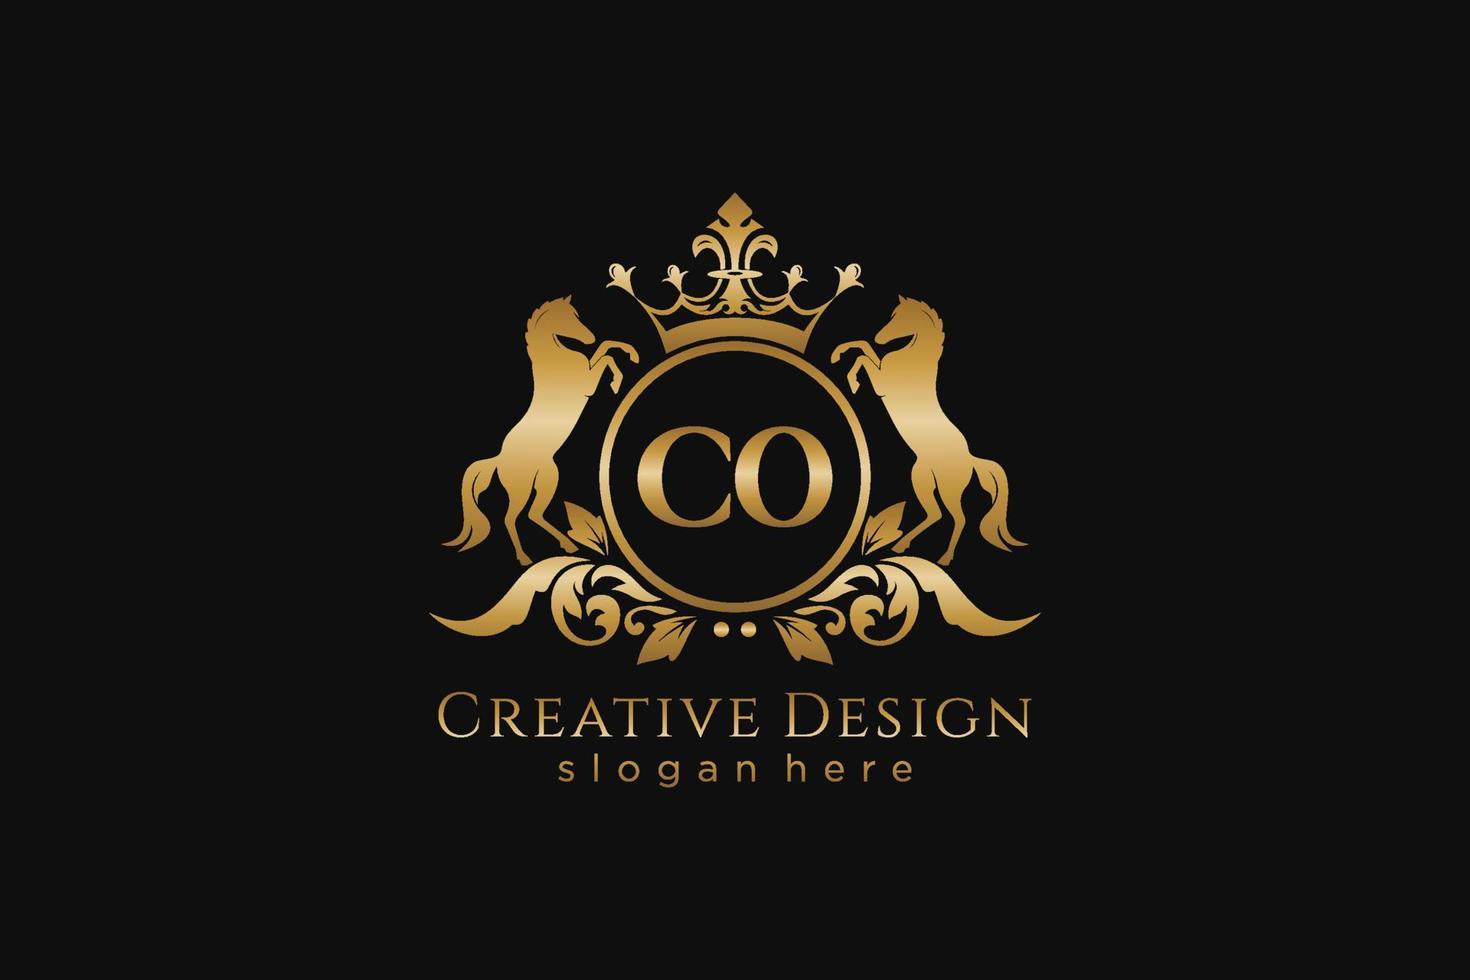 initial CO Retro golden crest with circle and two horses, badge template with scrolls and royal crown - perfect for luxurious branding projects vector